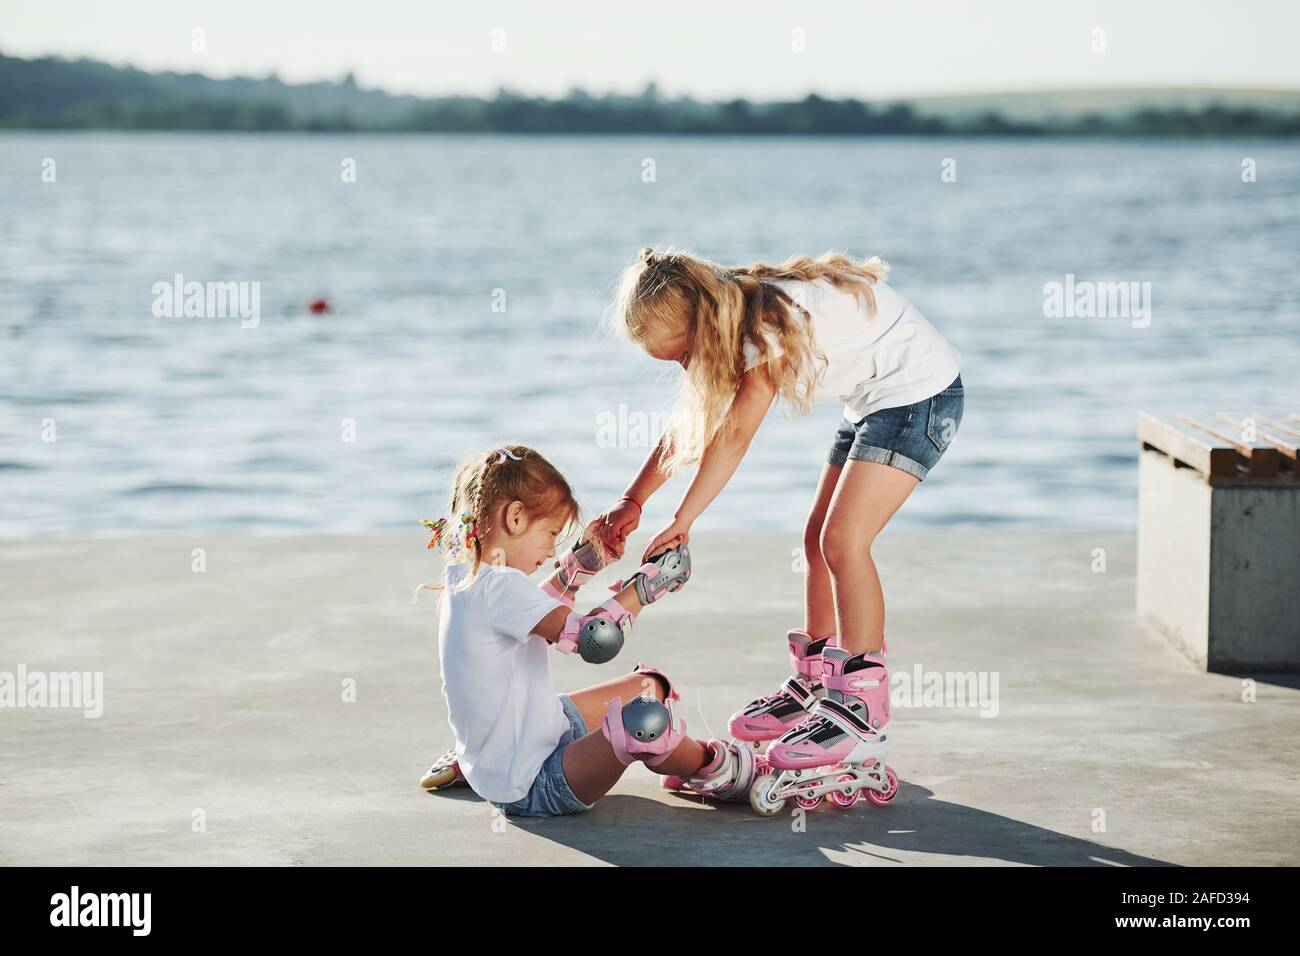 Two kids learning how to ride on roller skates at daytime near the lake Stock Photo